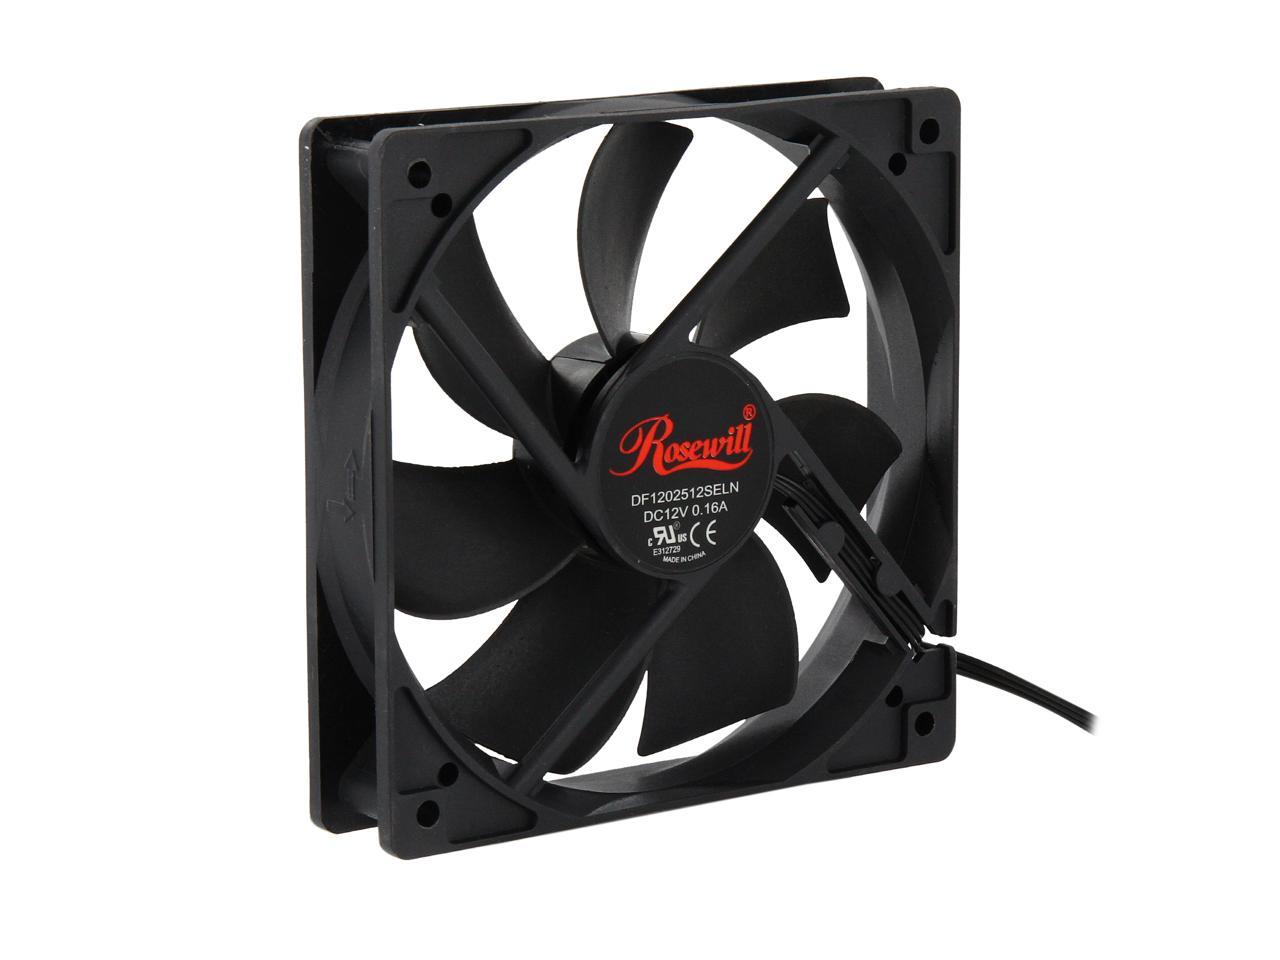 ROCF-13001-38.2 CFM Pack of 4 Rosewill 120mm Computer Case Cooling Fans 